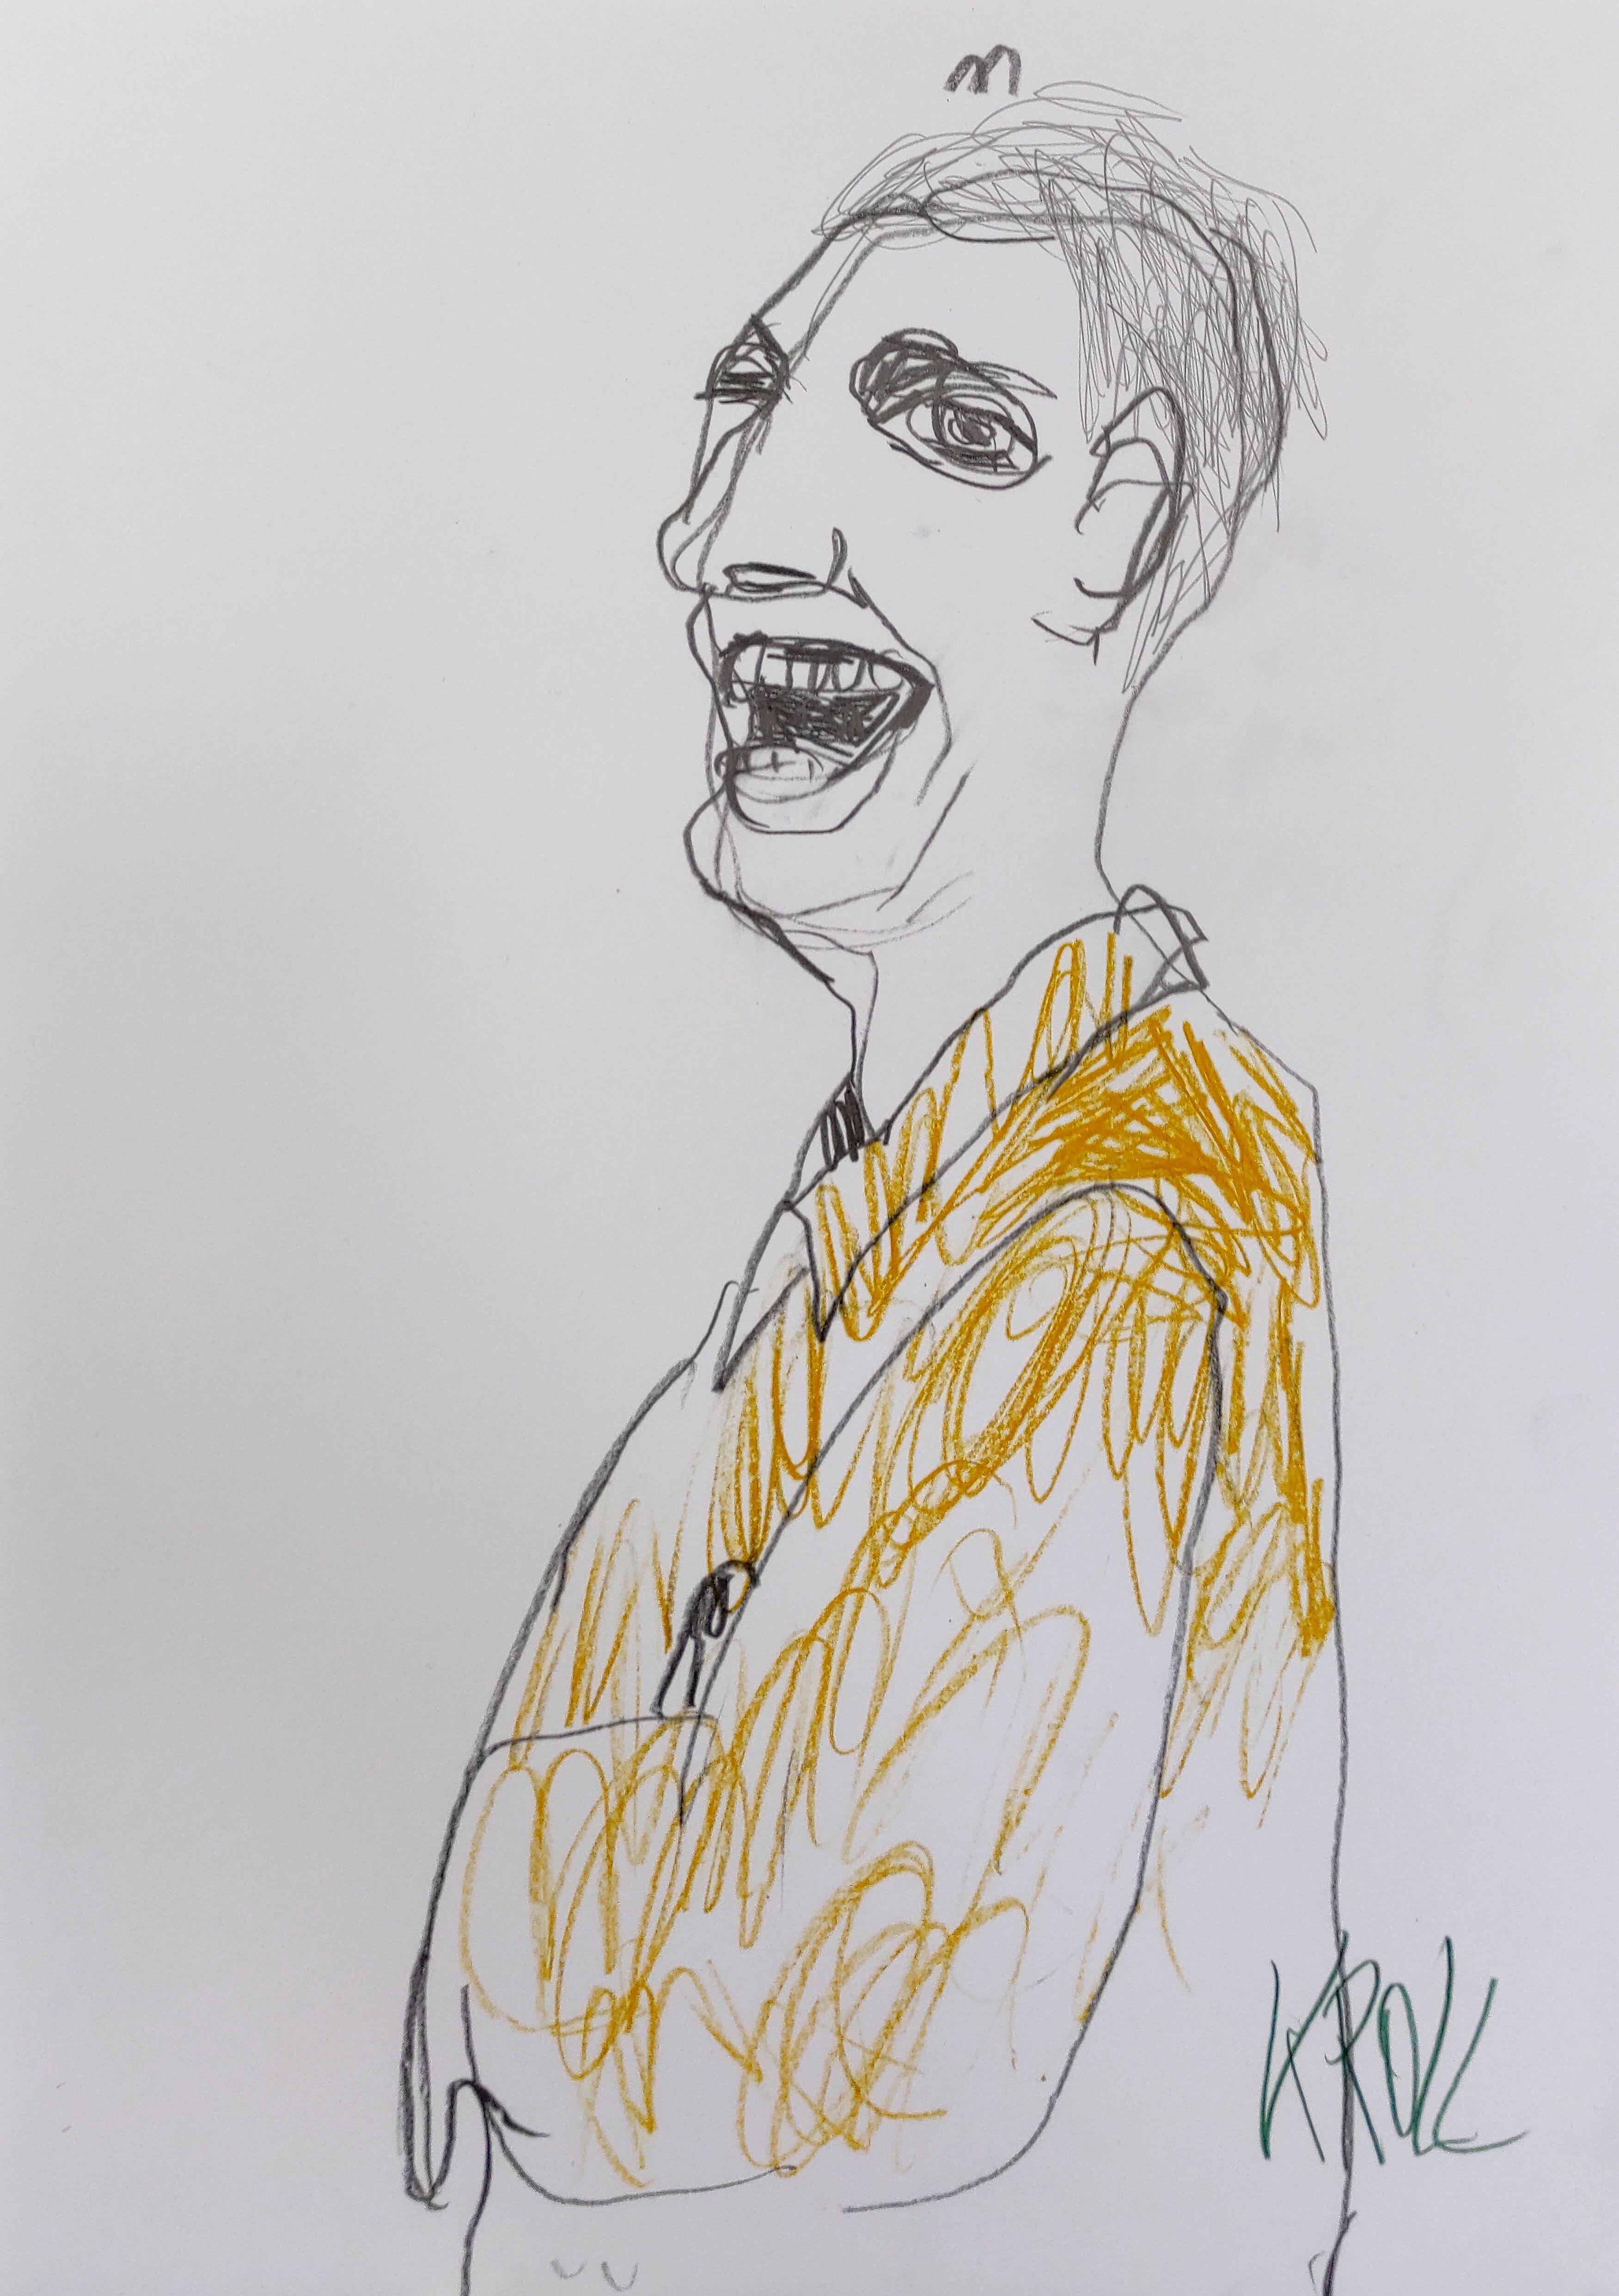 Laughing man, Drawing, Pencil/Colored Pencil on Paper - Art by Barbara Kroll